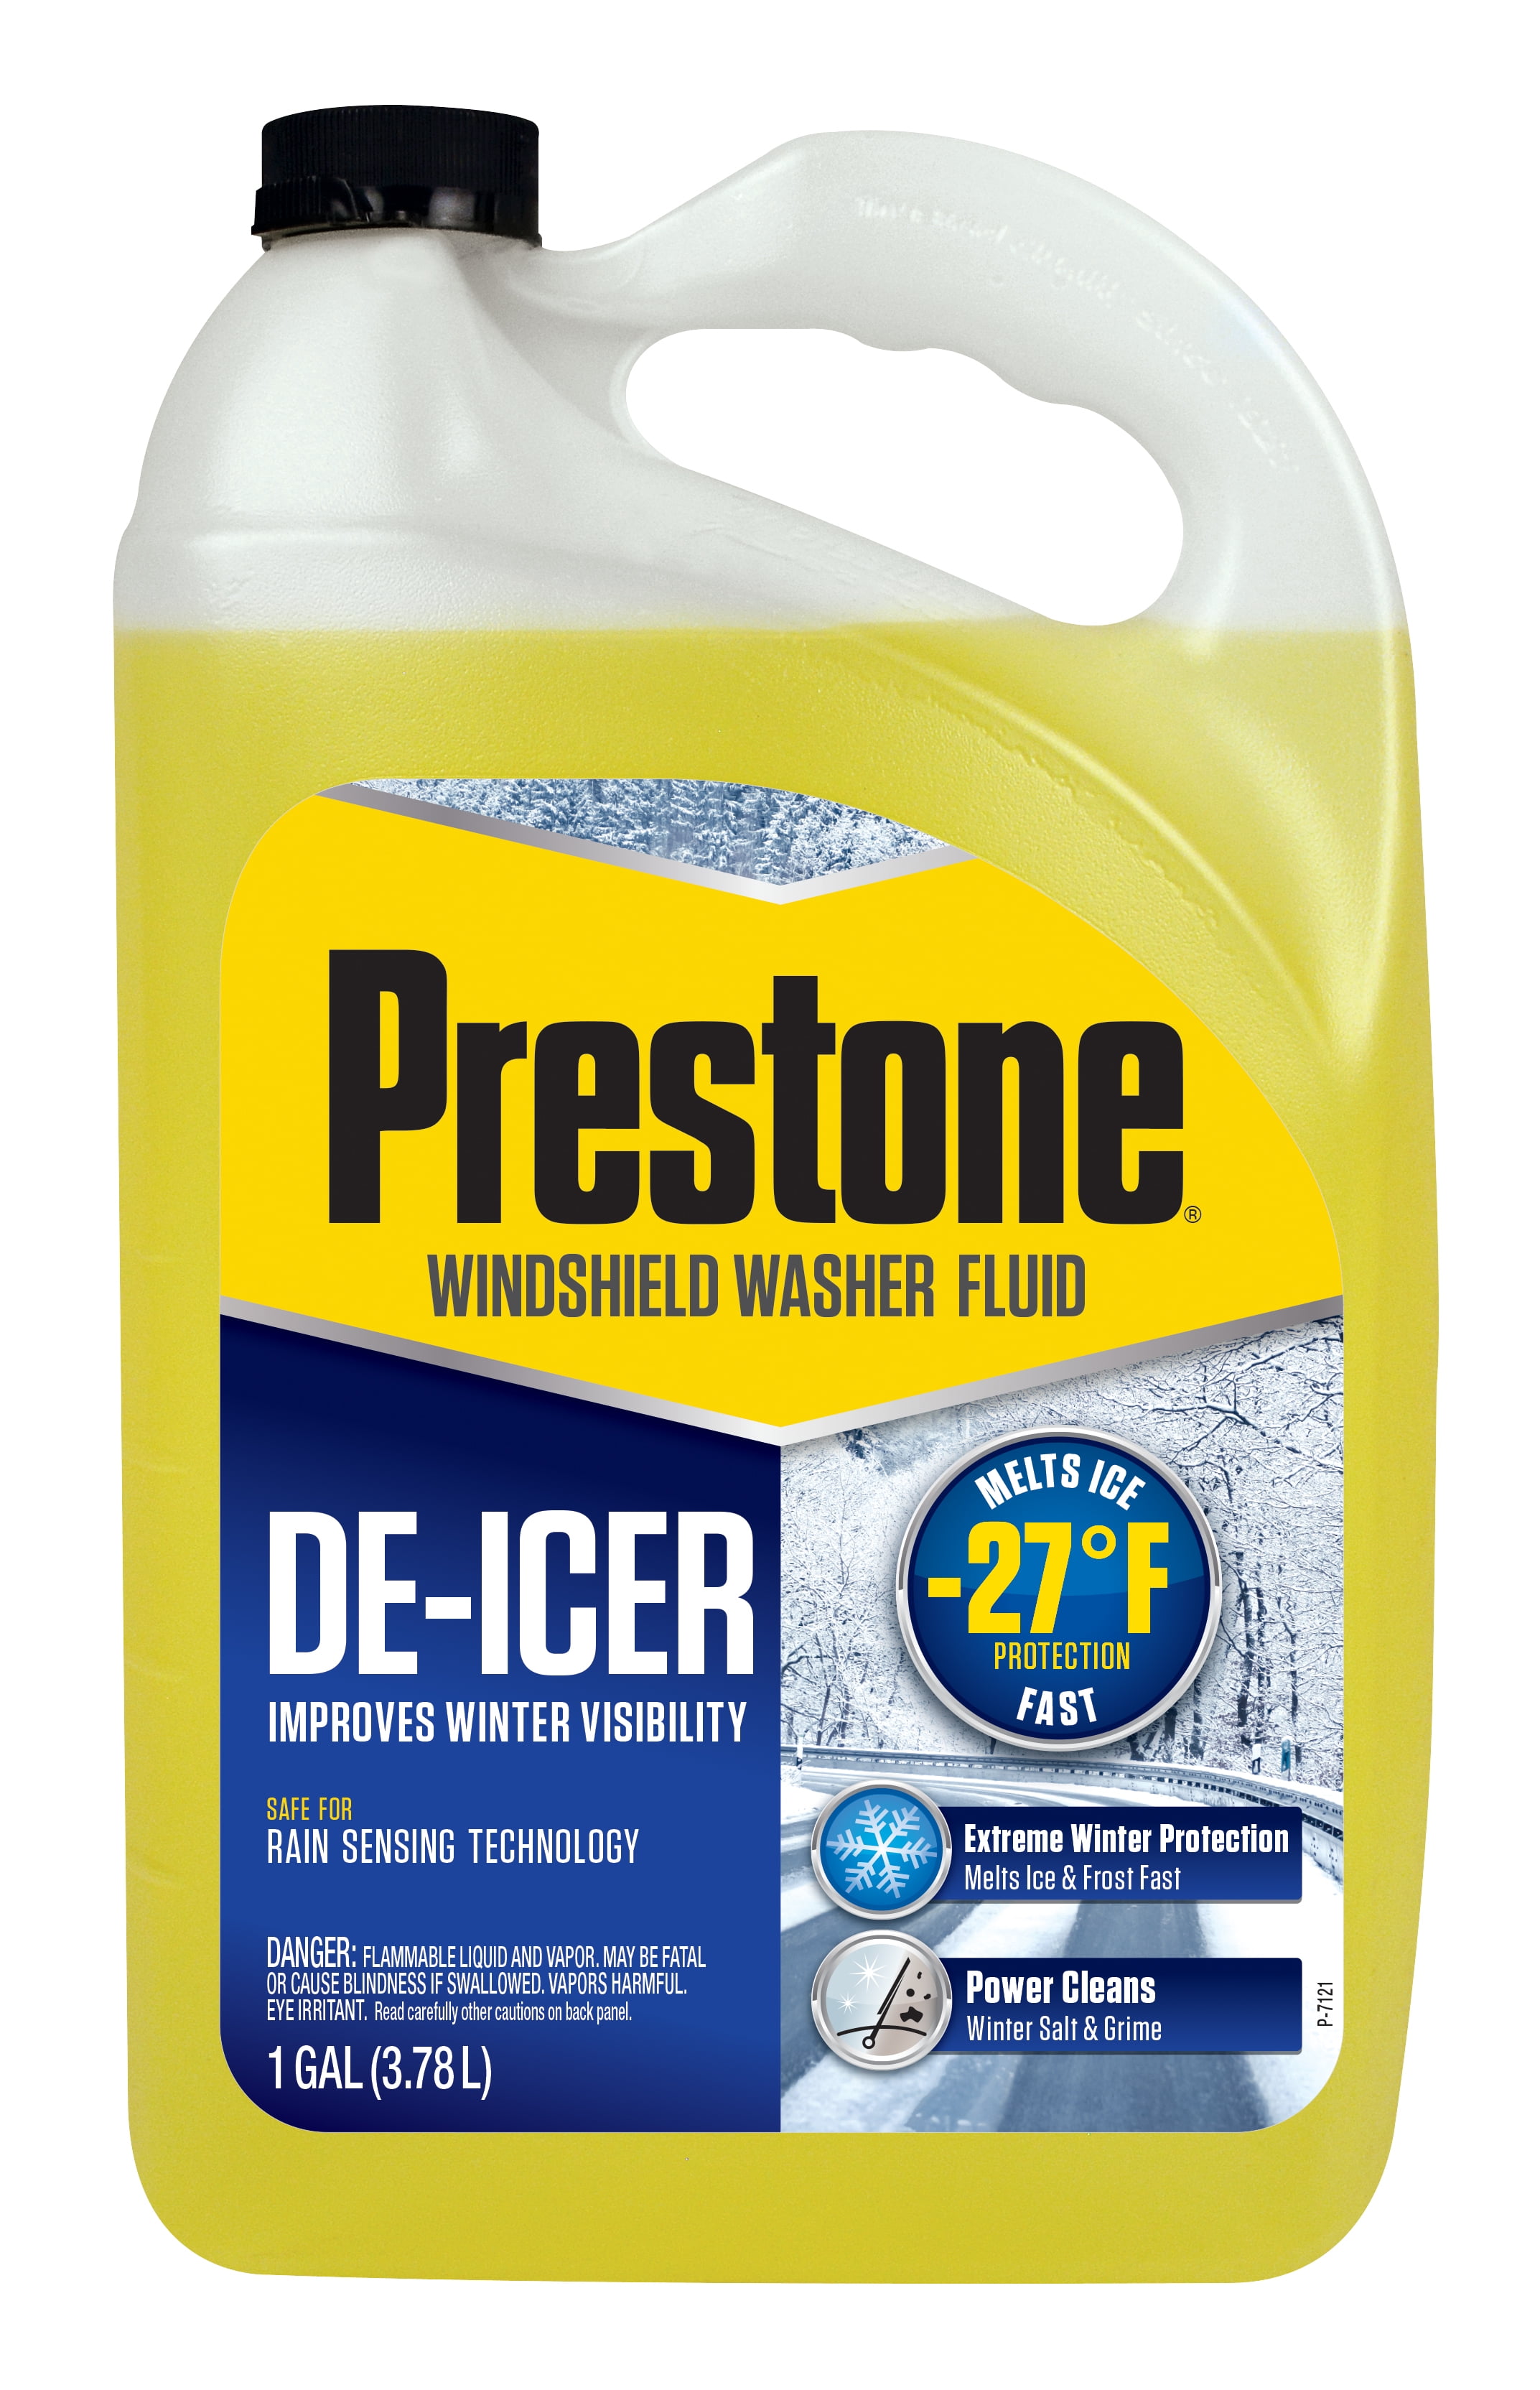 Disinfecting car wipes by Prestone : review - Car & vehicle